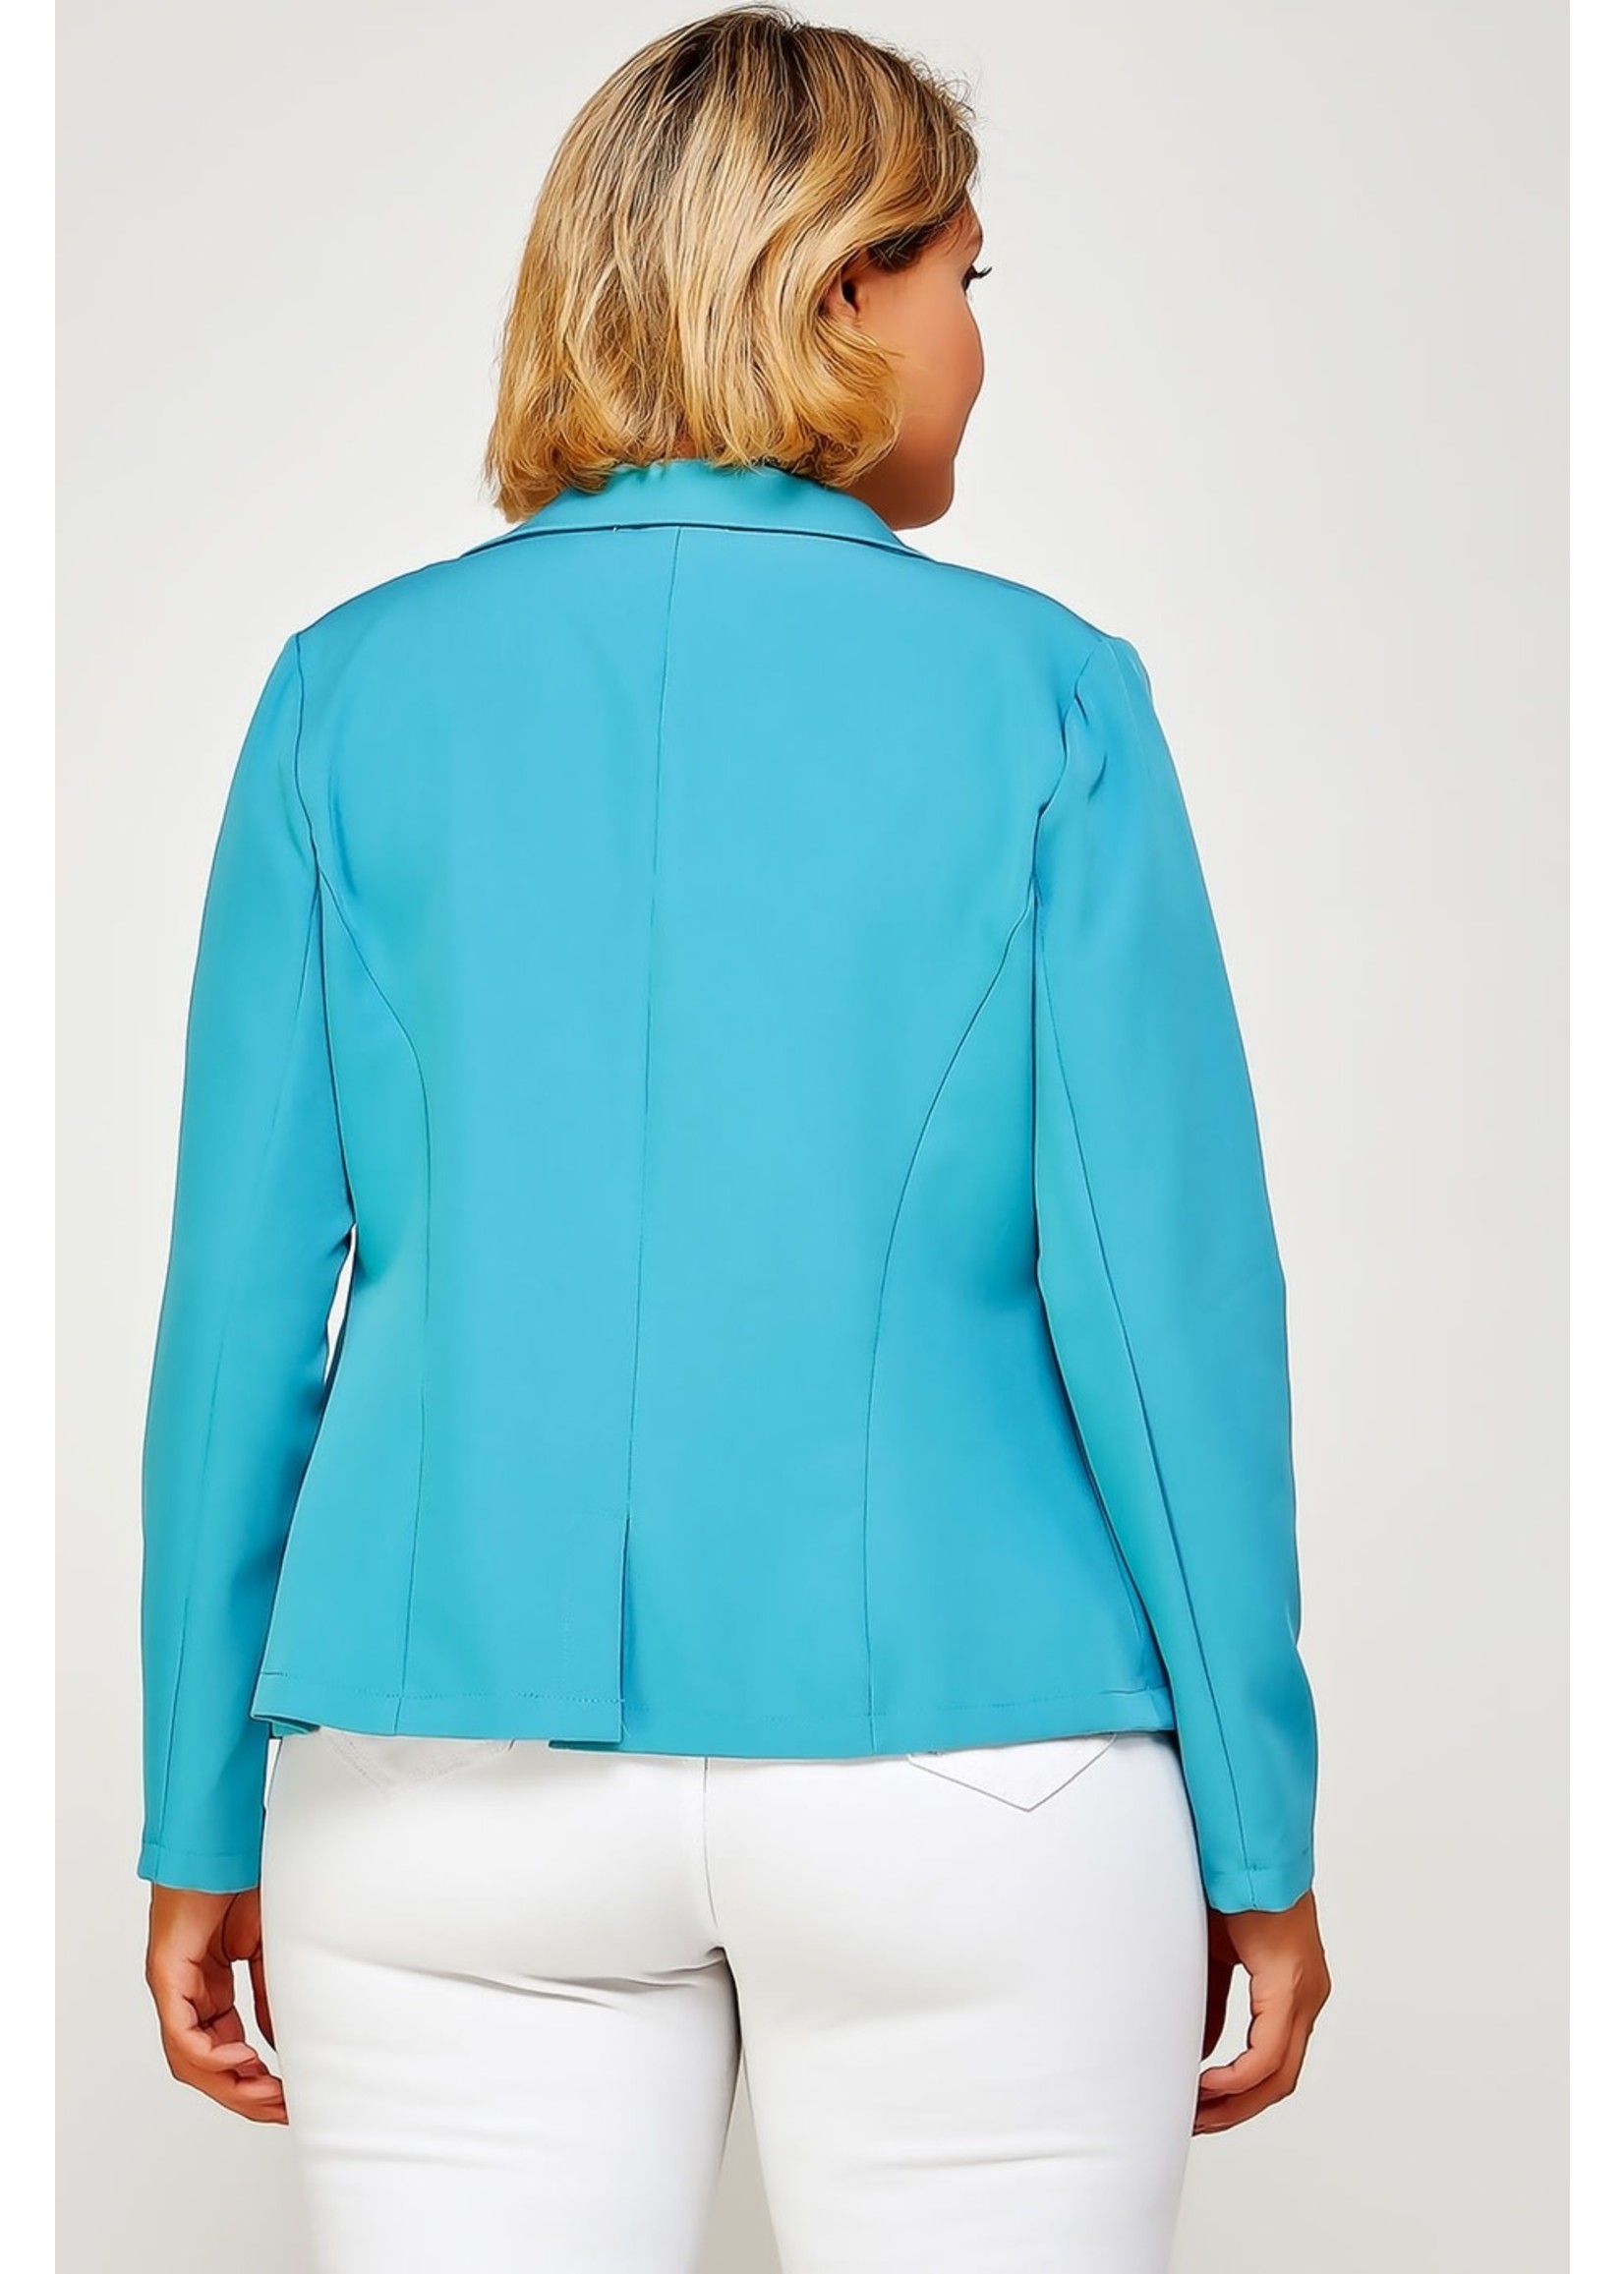 Fitted Blazer w/ Pockets in 3 colors